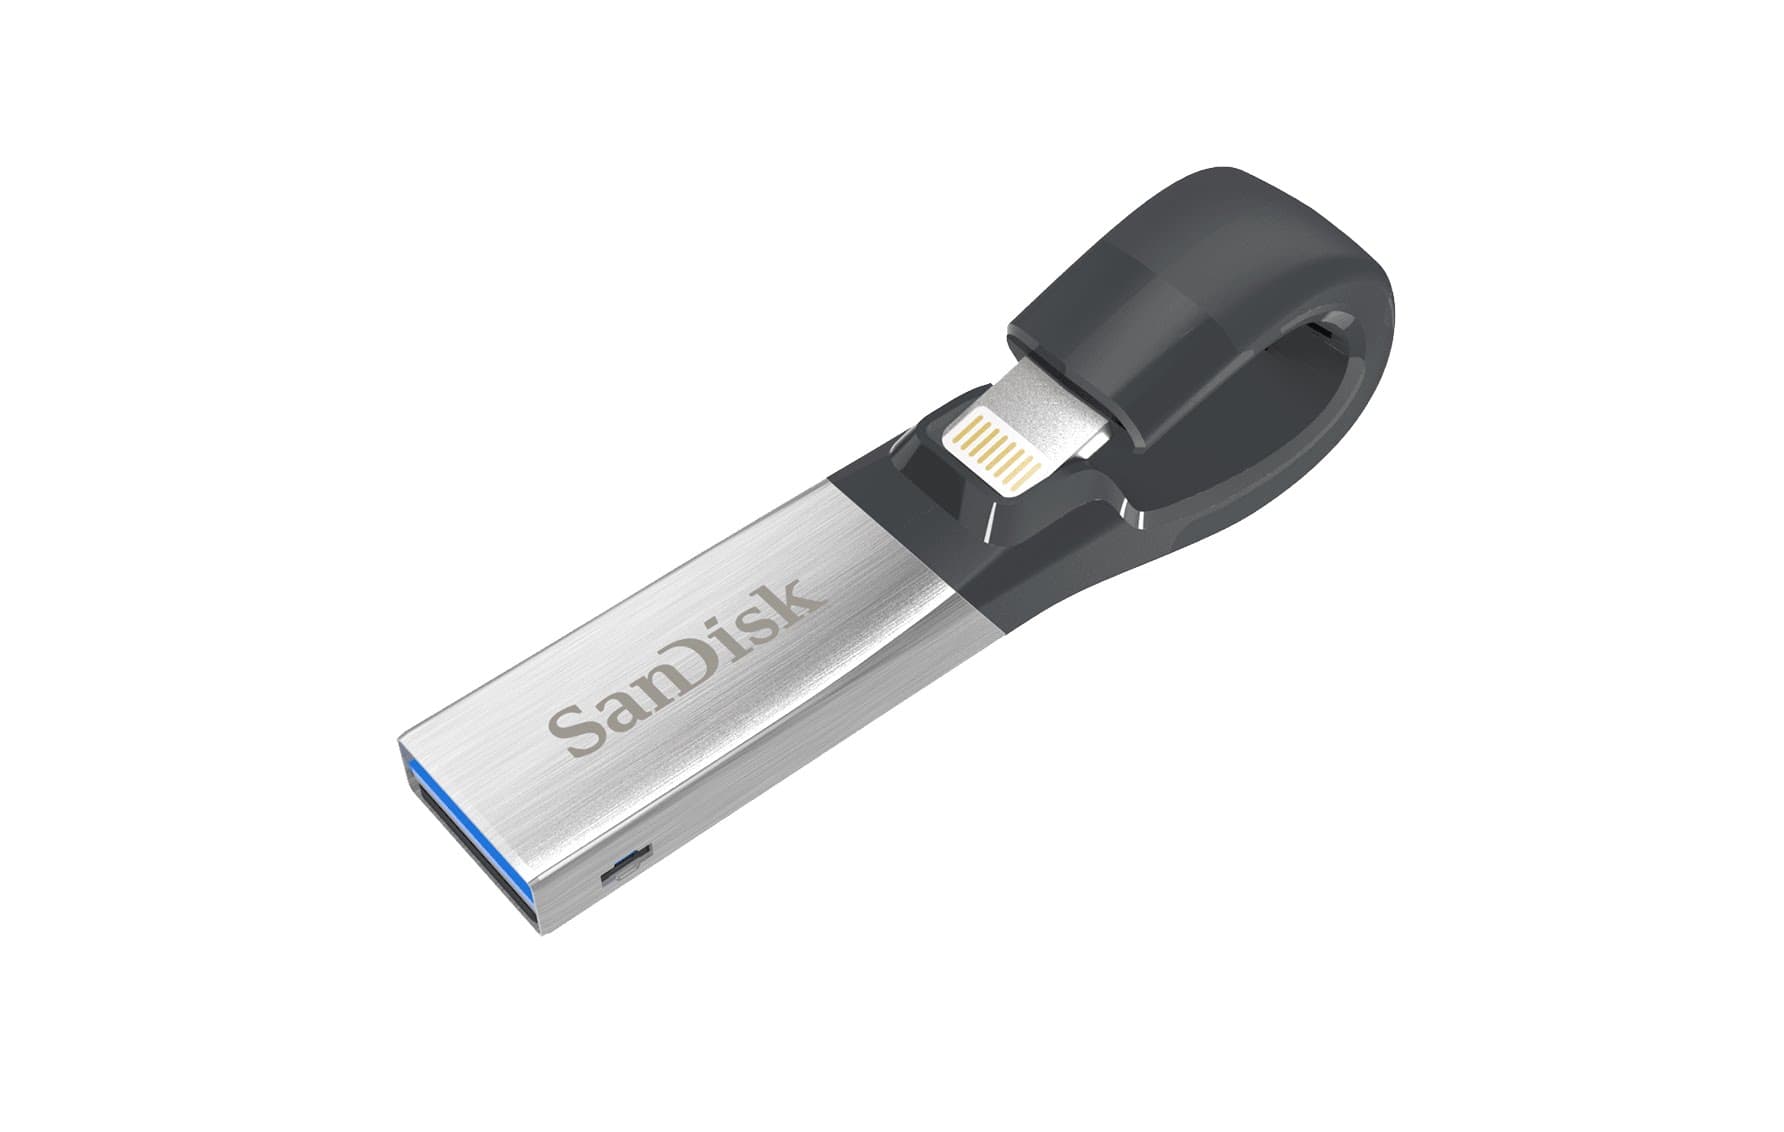 Review: SanDisk iXpand 